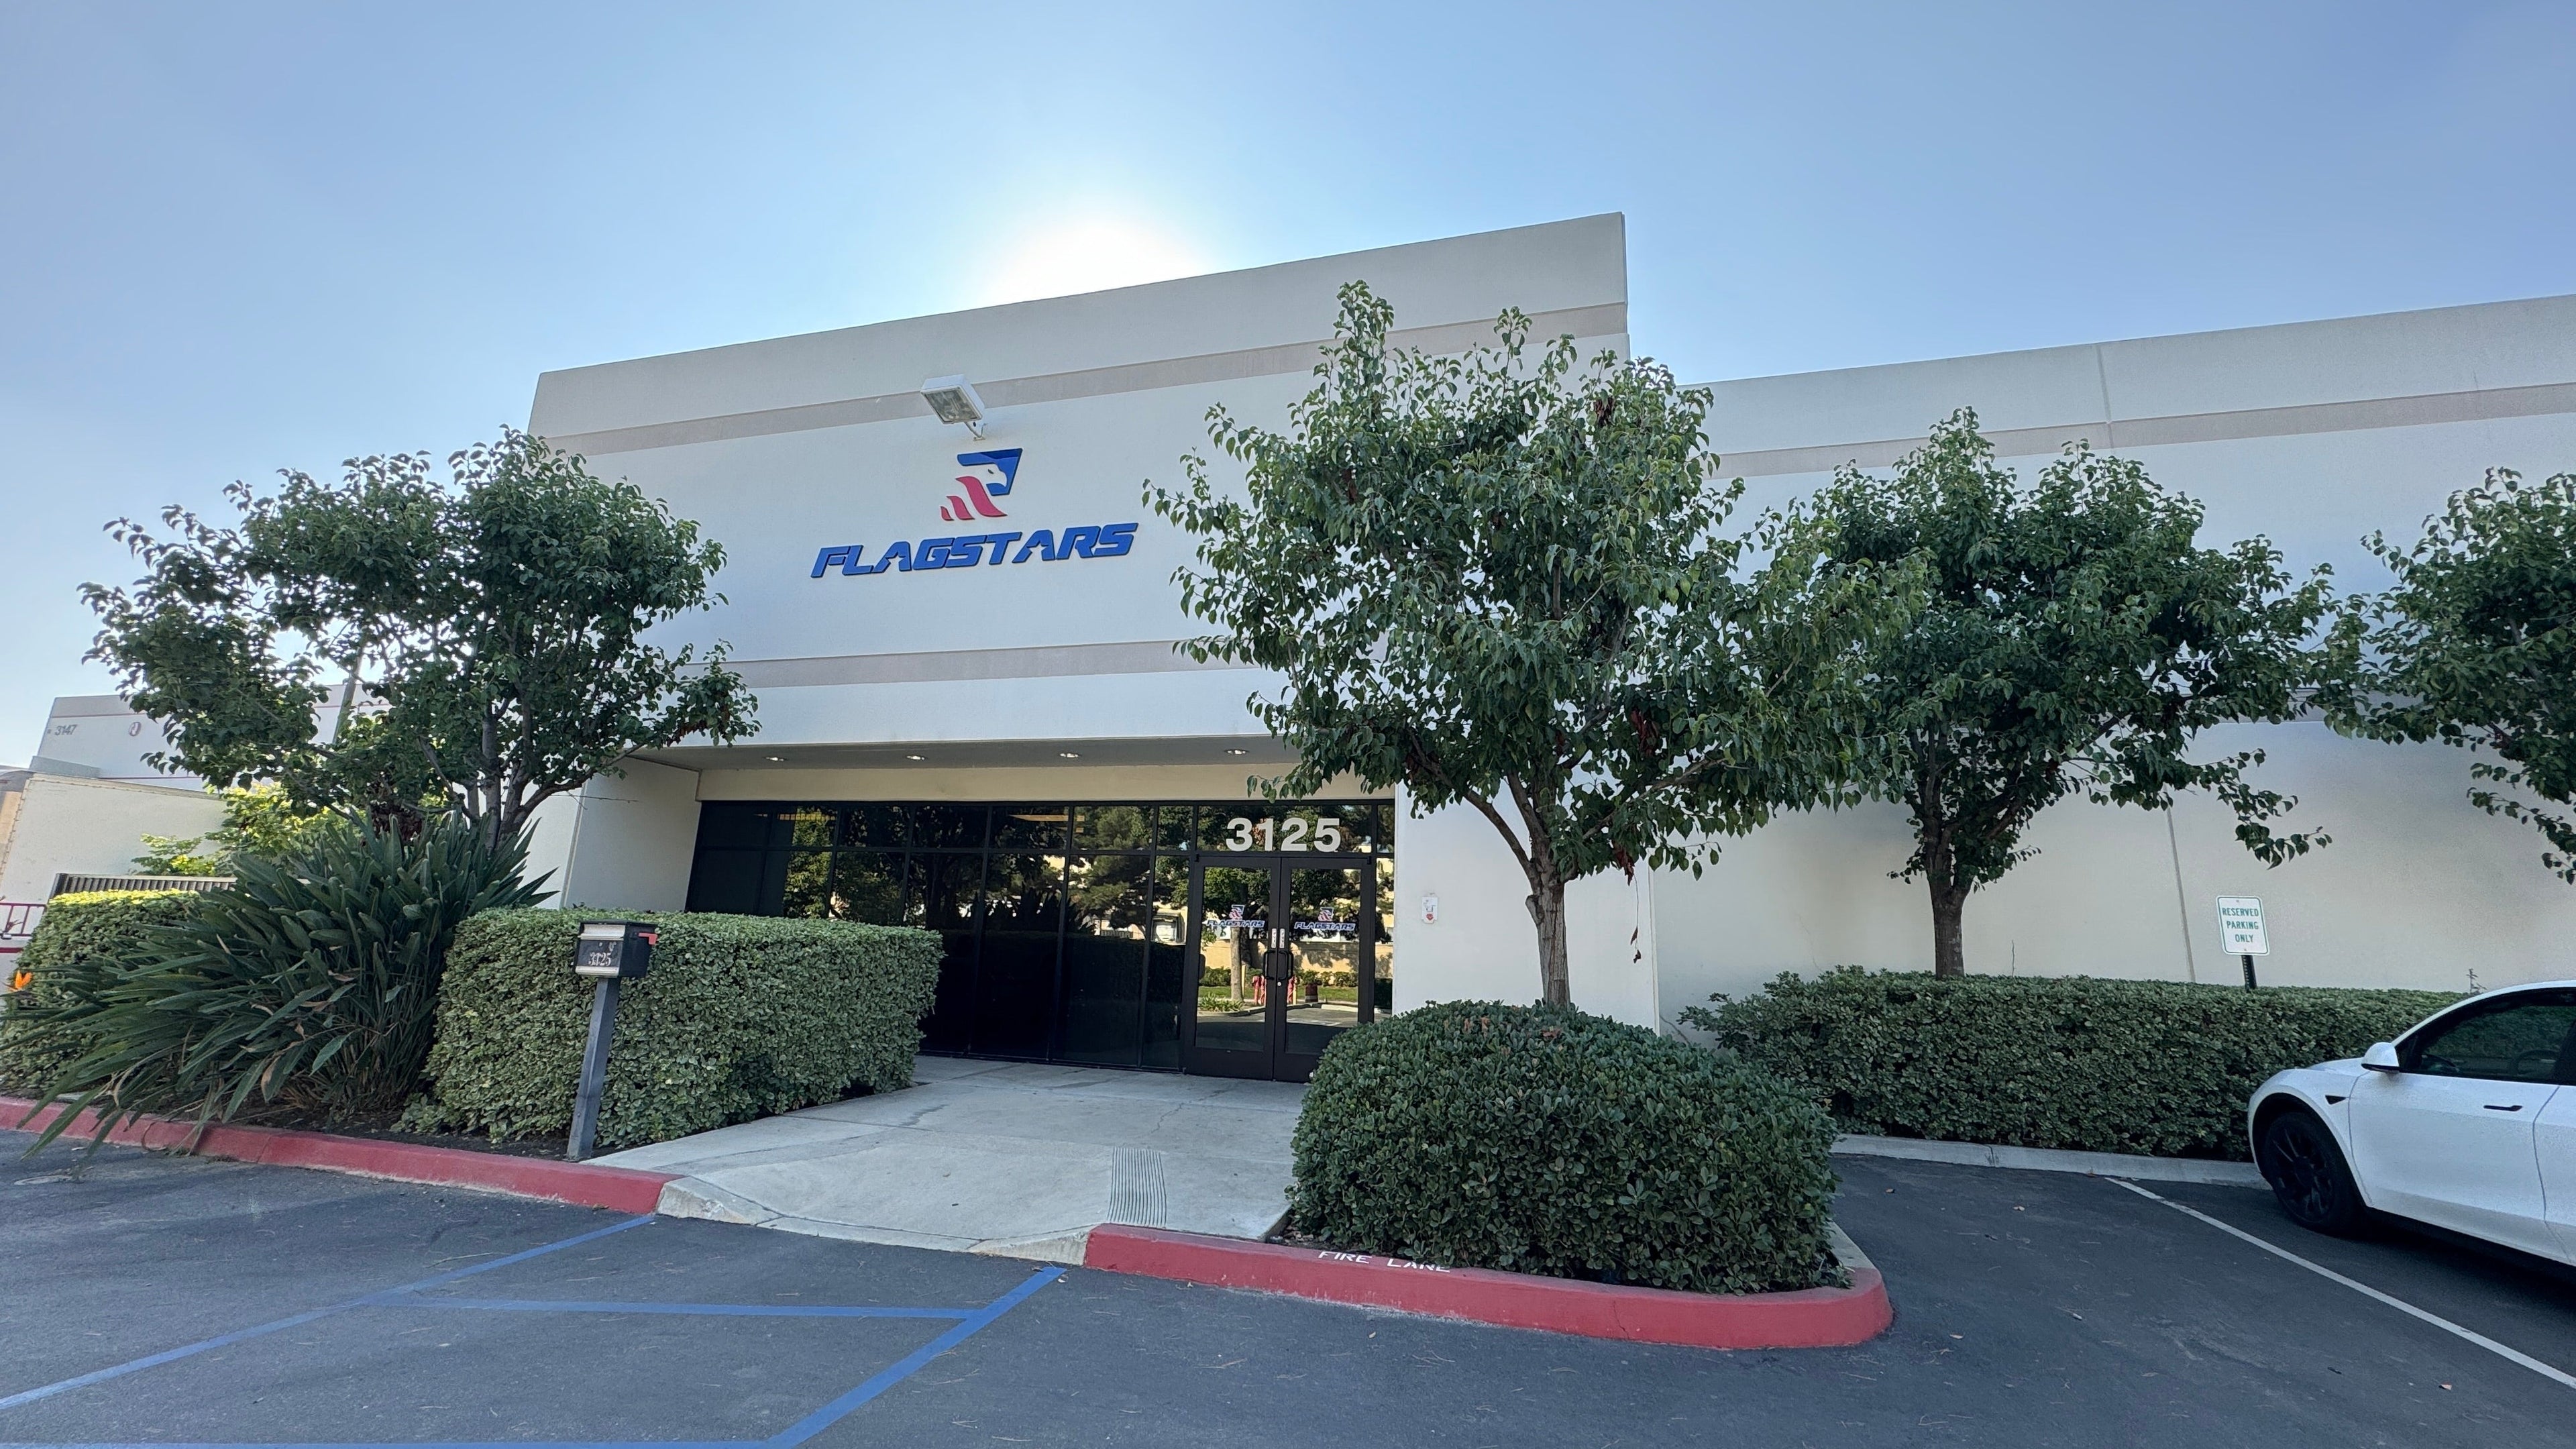 A single-story commercial building with the "Flagstar" logo above the entrance is located at 3125. Trees and shrubs surround the front, and a white car is parked to the right. Known as a reputable manufacturer, this site prides itself on offering high-quality, hand-made products.